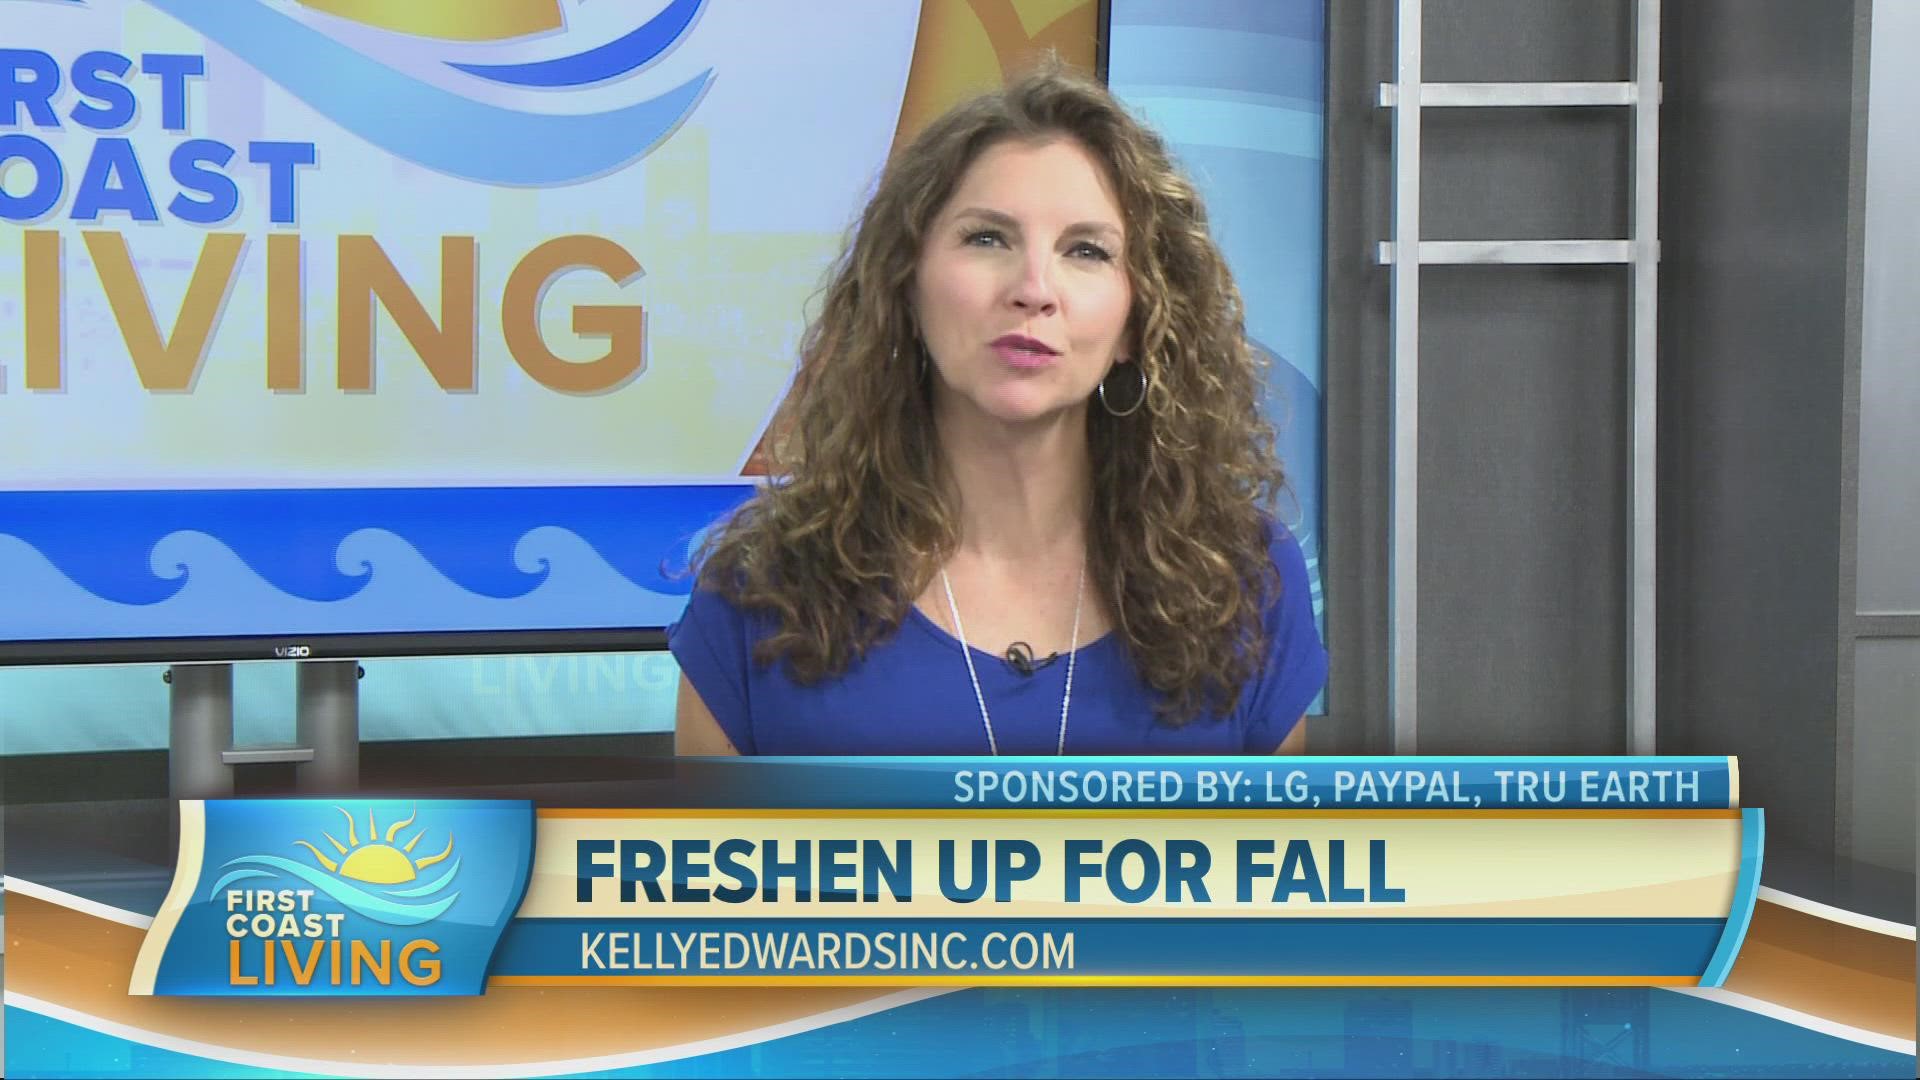 Lifestyle and design consultant, Kelly Edwards shares ways to freshen up the home for fall.